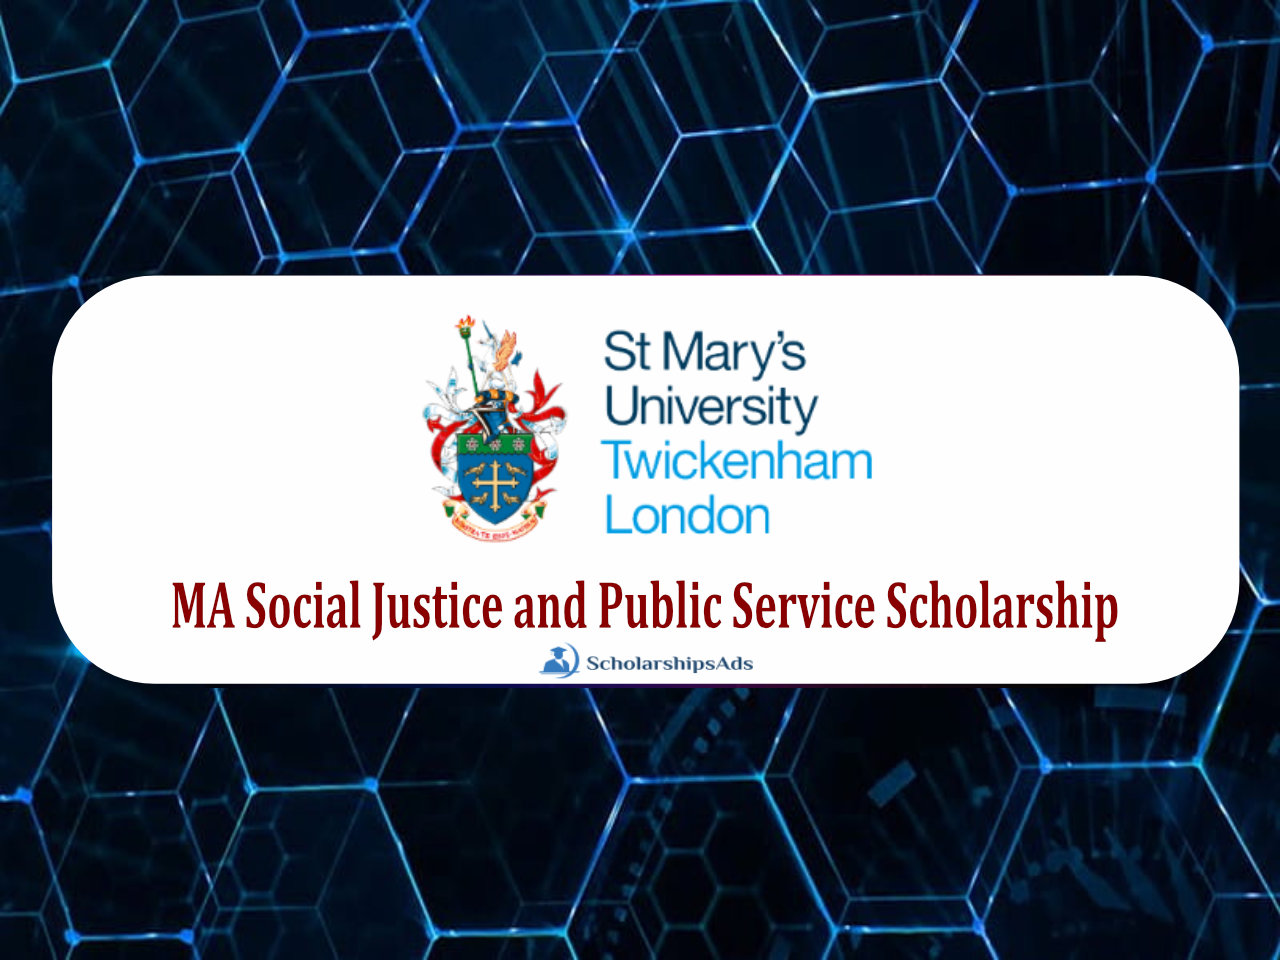 MA Social Justice and Public Service Scholarships.